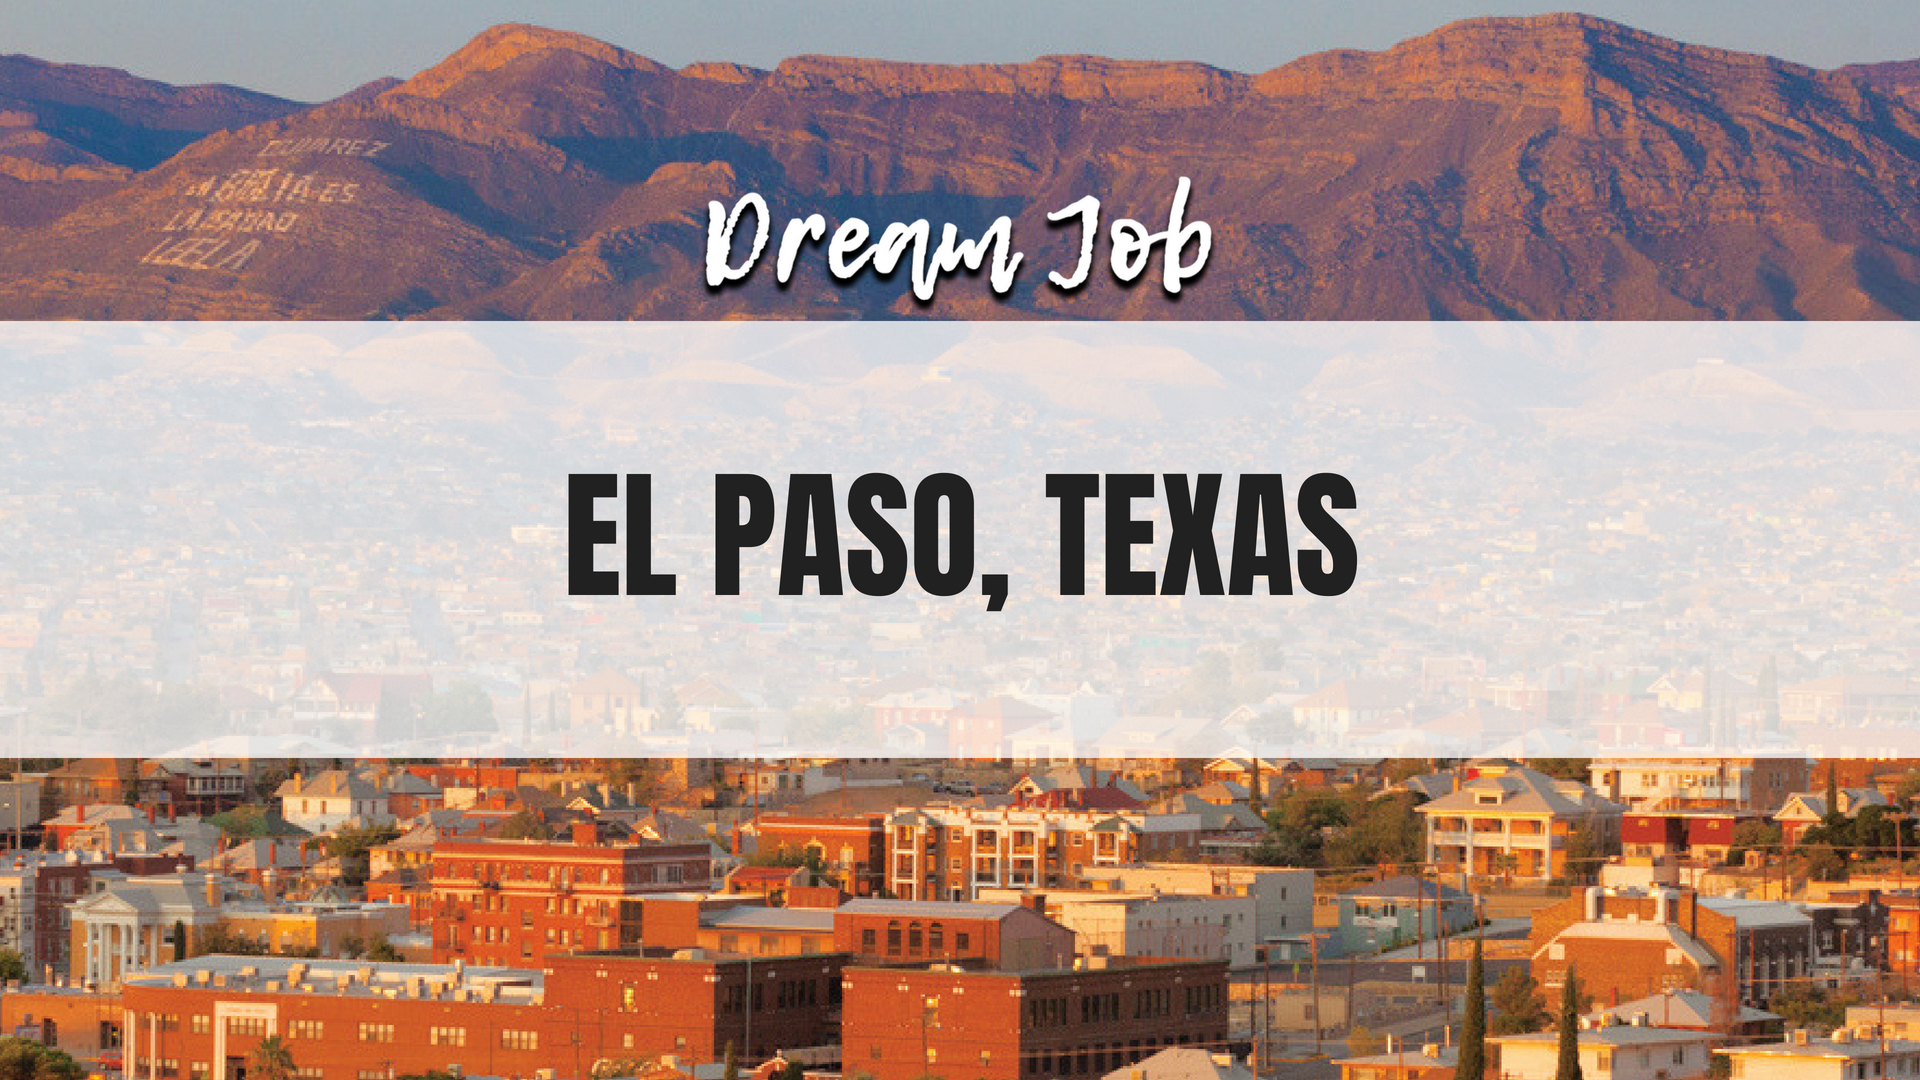 We have an immediate opening for a Pharmacist in El Paso, Texas! 